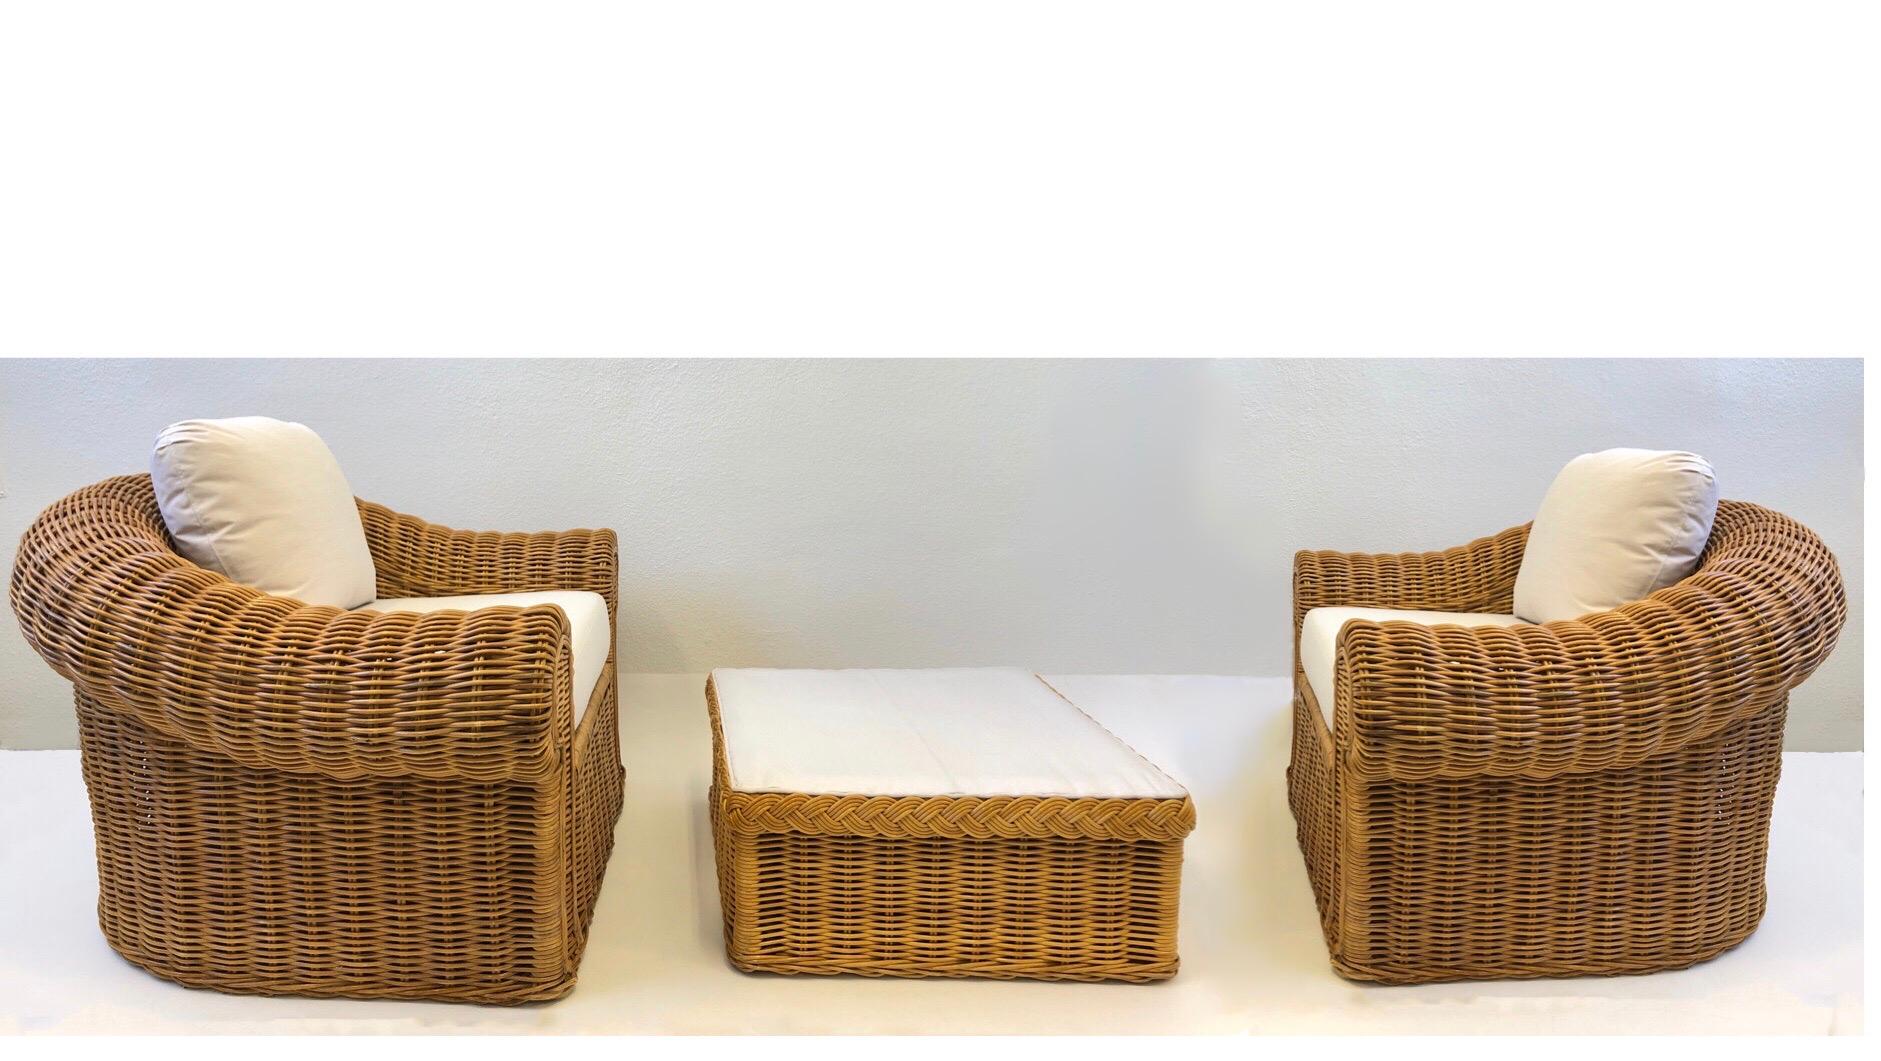 A spectacular 1980s pair of large scale wicker lounge chairs and ottoman in the style of Michael Taylor. Newly recovered with off white Sunbrella fabric. The ottoman could be used as a cocktail table without cushion.
Measurements:
Chair- 42” wide,